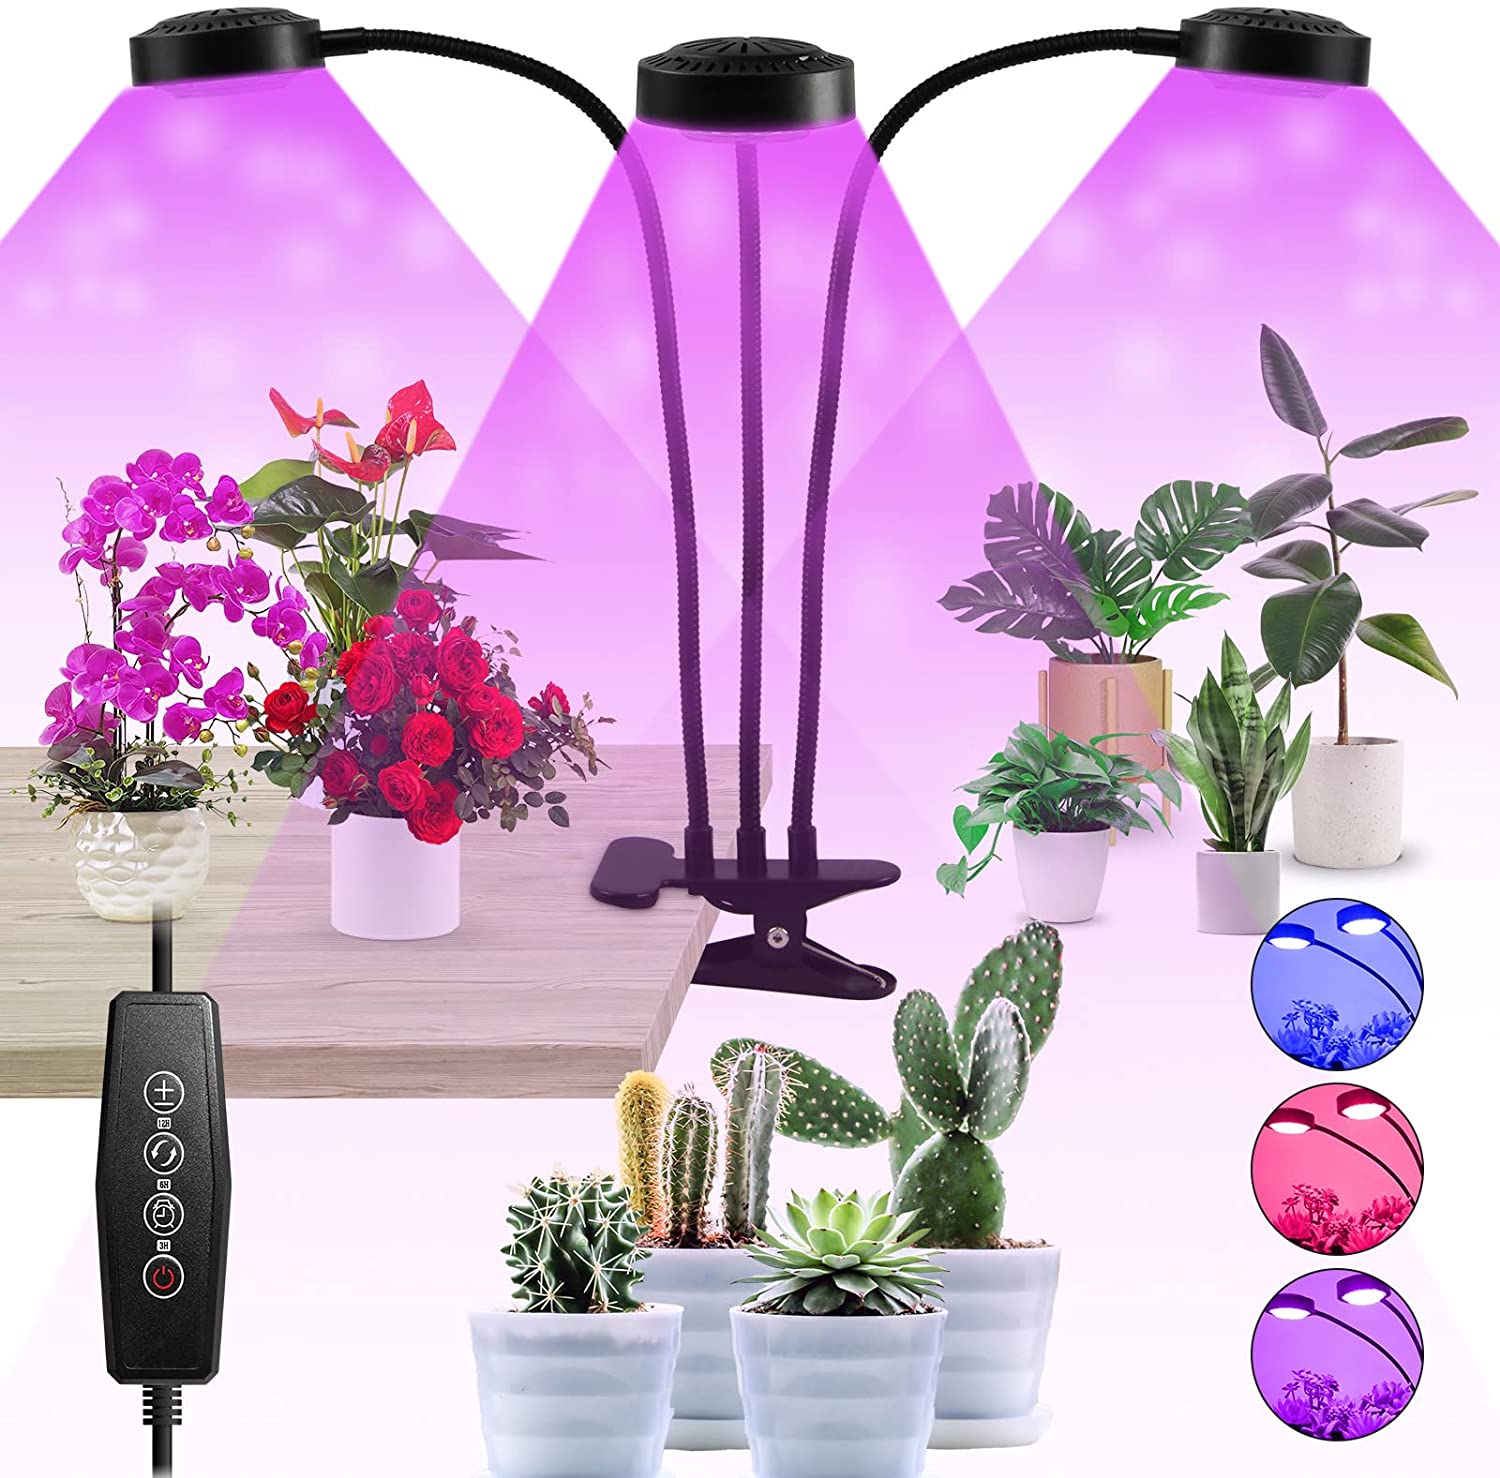 24W Adjustable 3-Head Clip-on Grow Light (US UK ONLY)